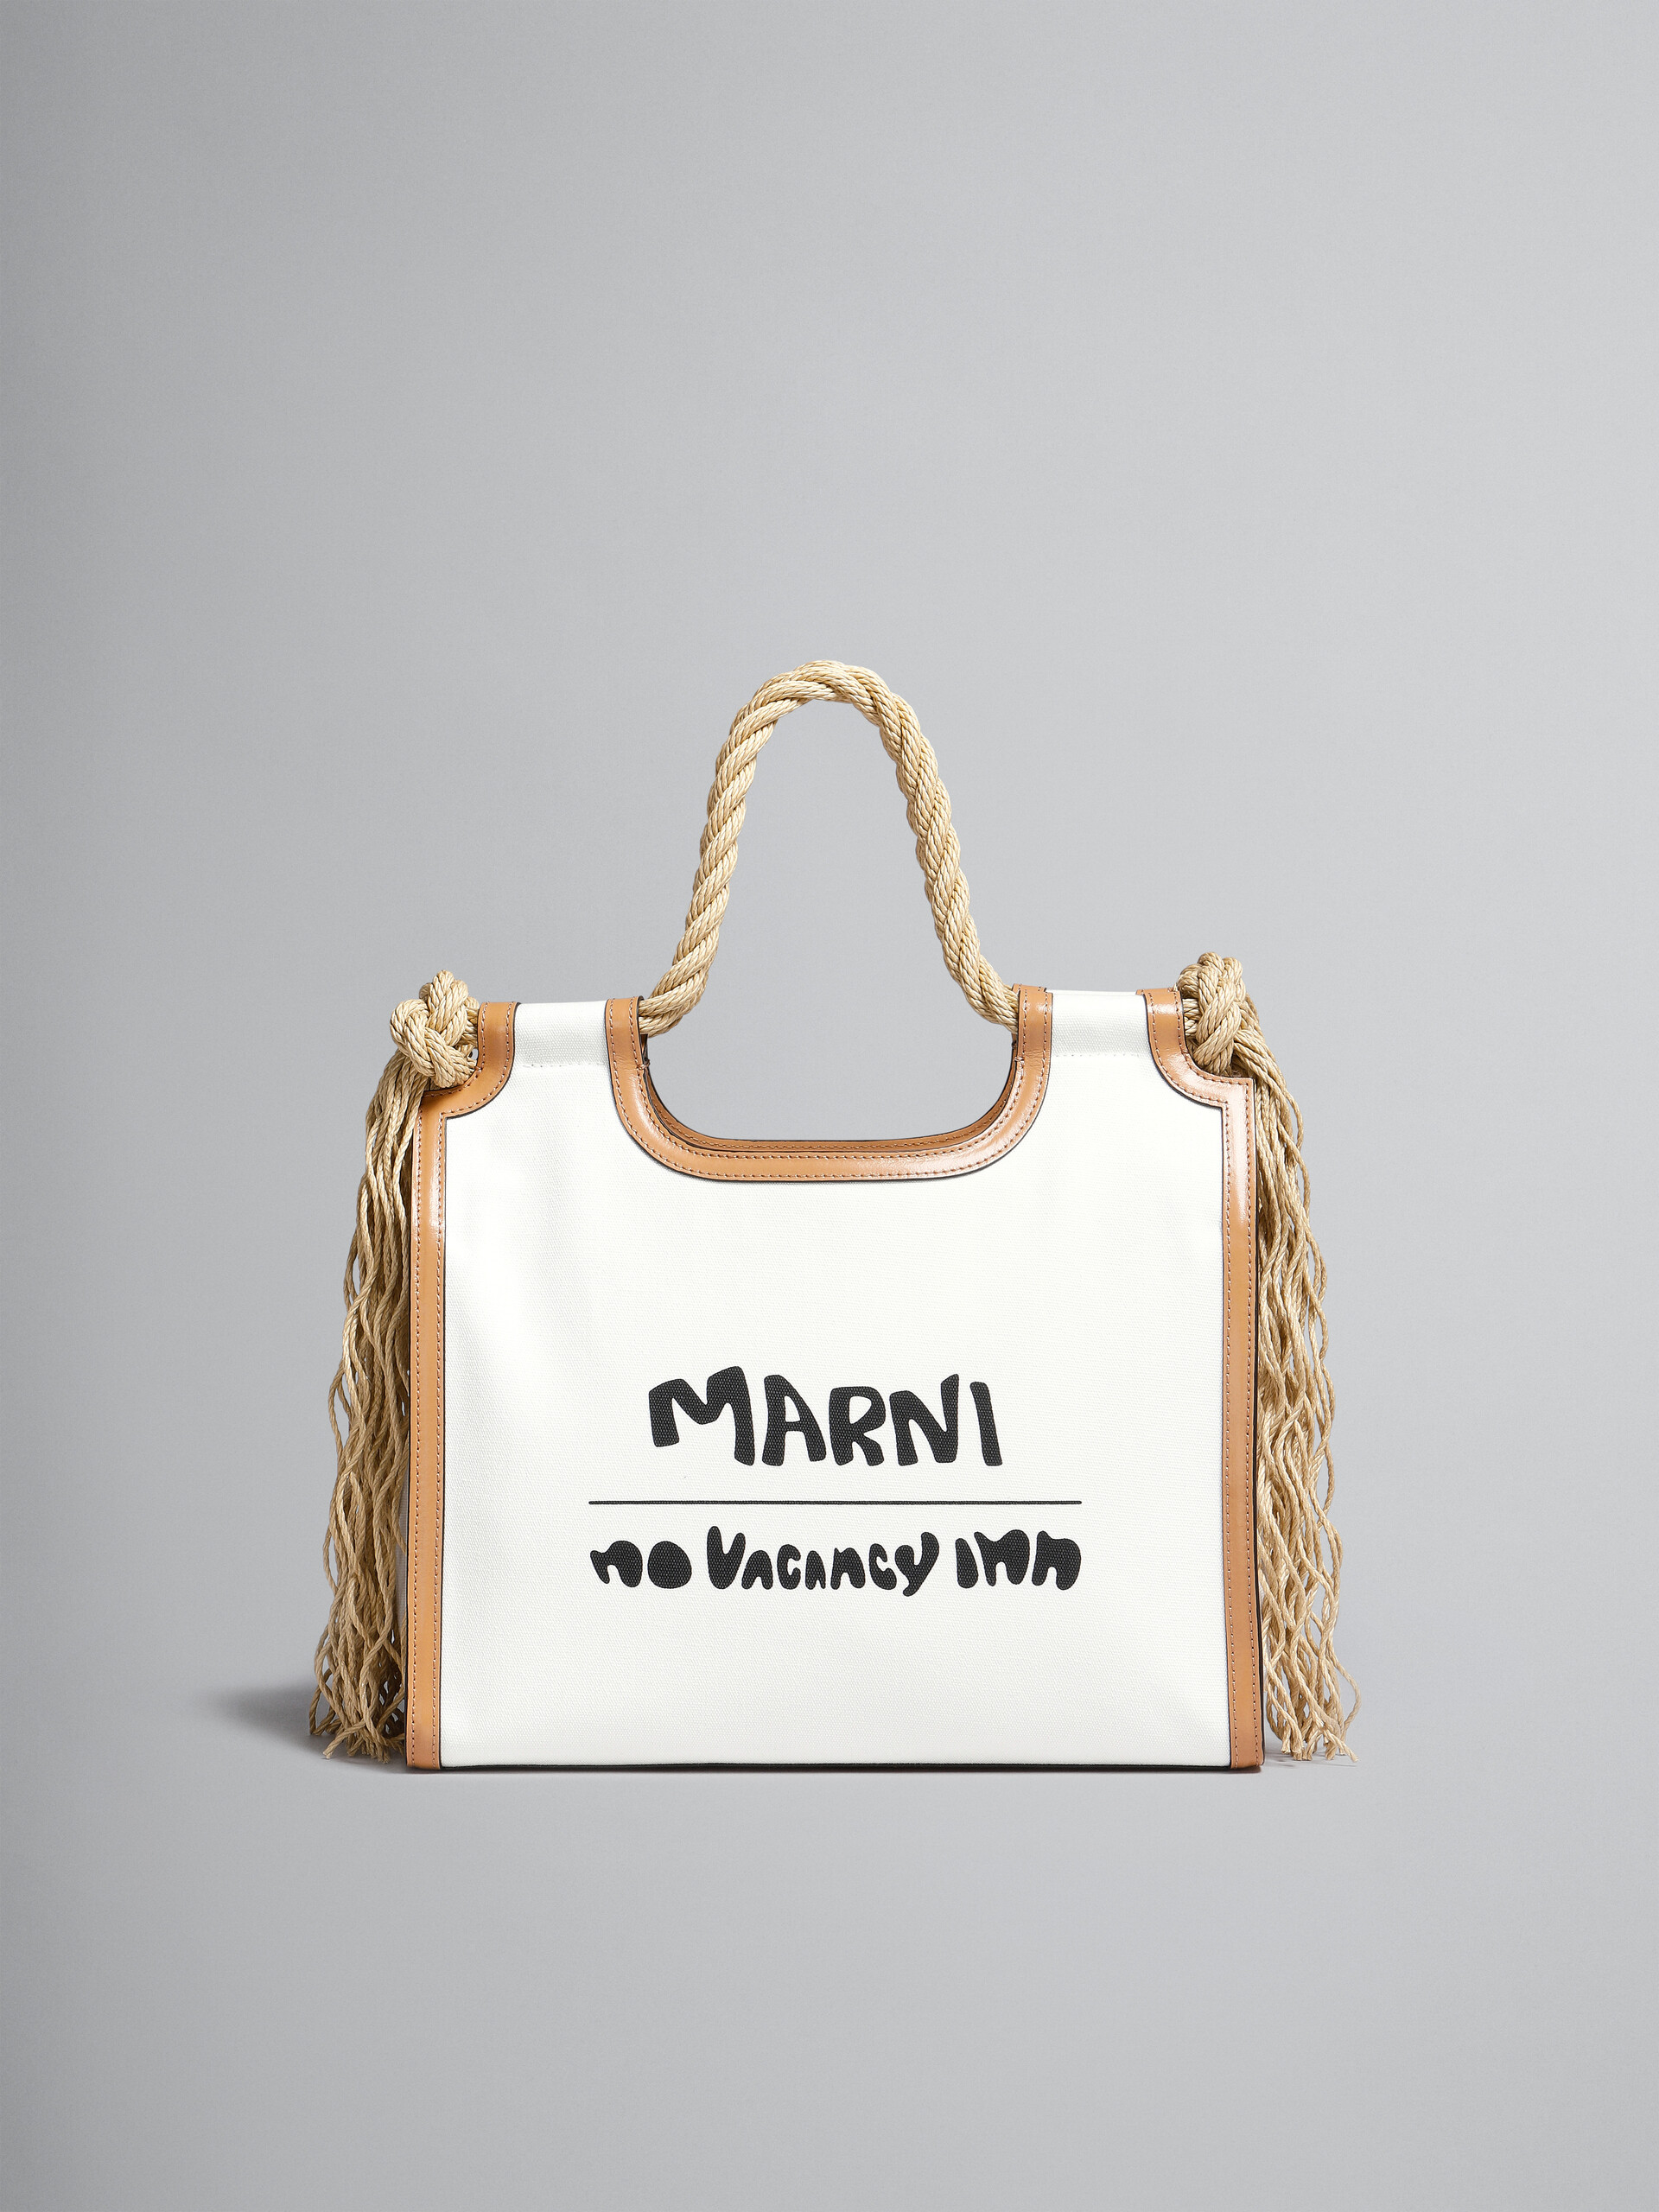 Marni x No Vacancy Inn - Marcel Tote Bag in white canvas with beige trims - Handbag - Image 1